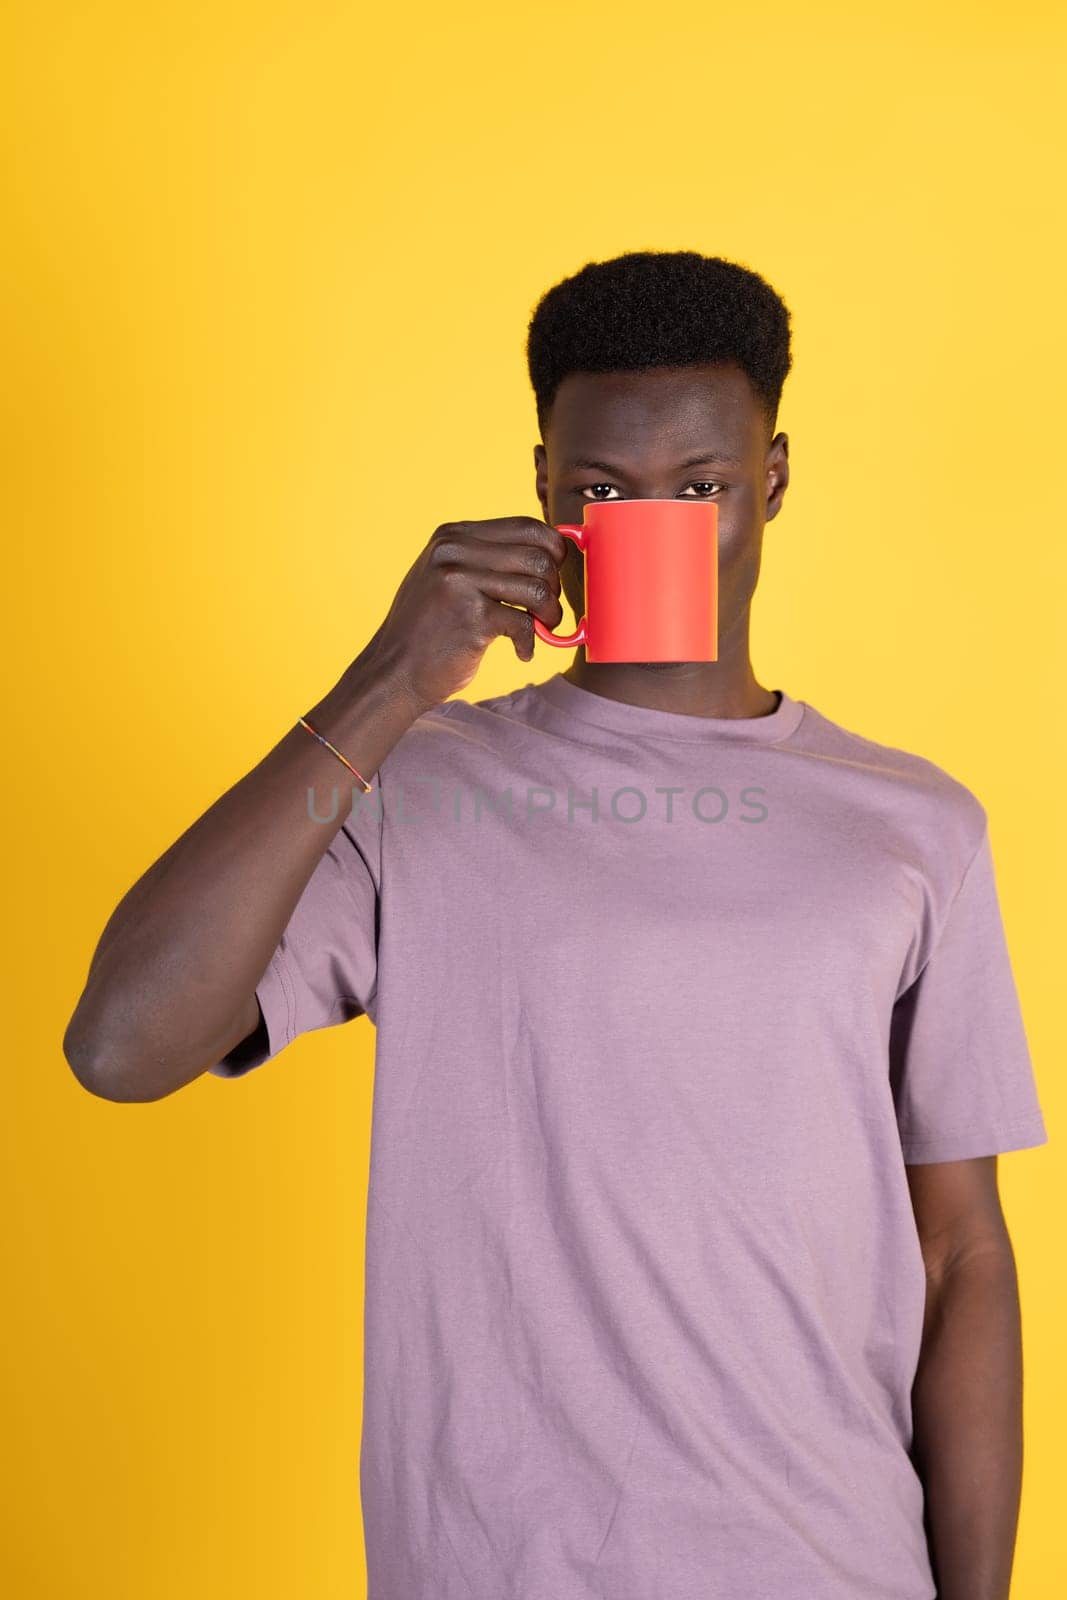 A man in a tan shirt is holding a red coffee cup and looking at the camera by Ceballos